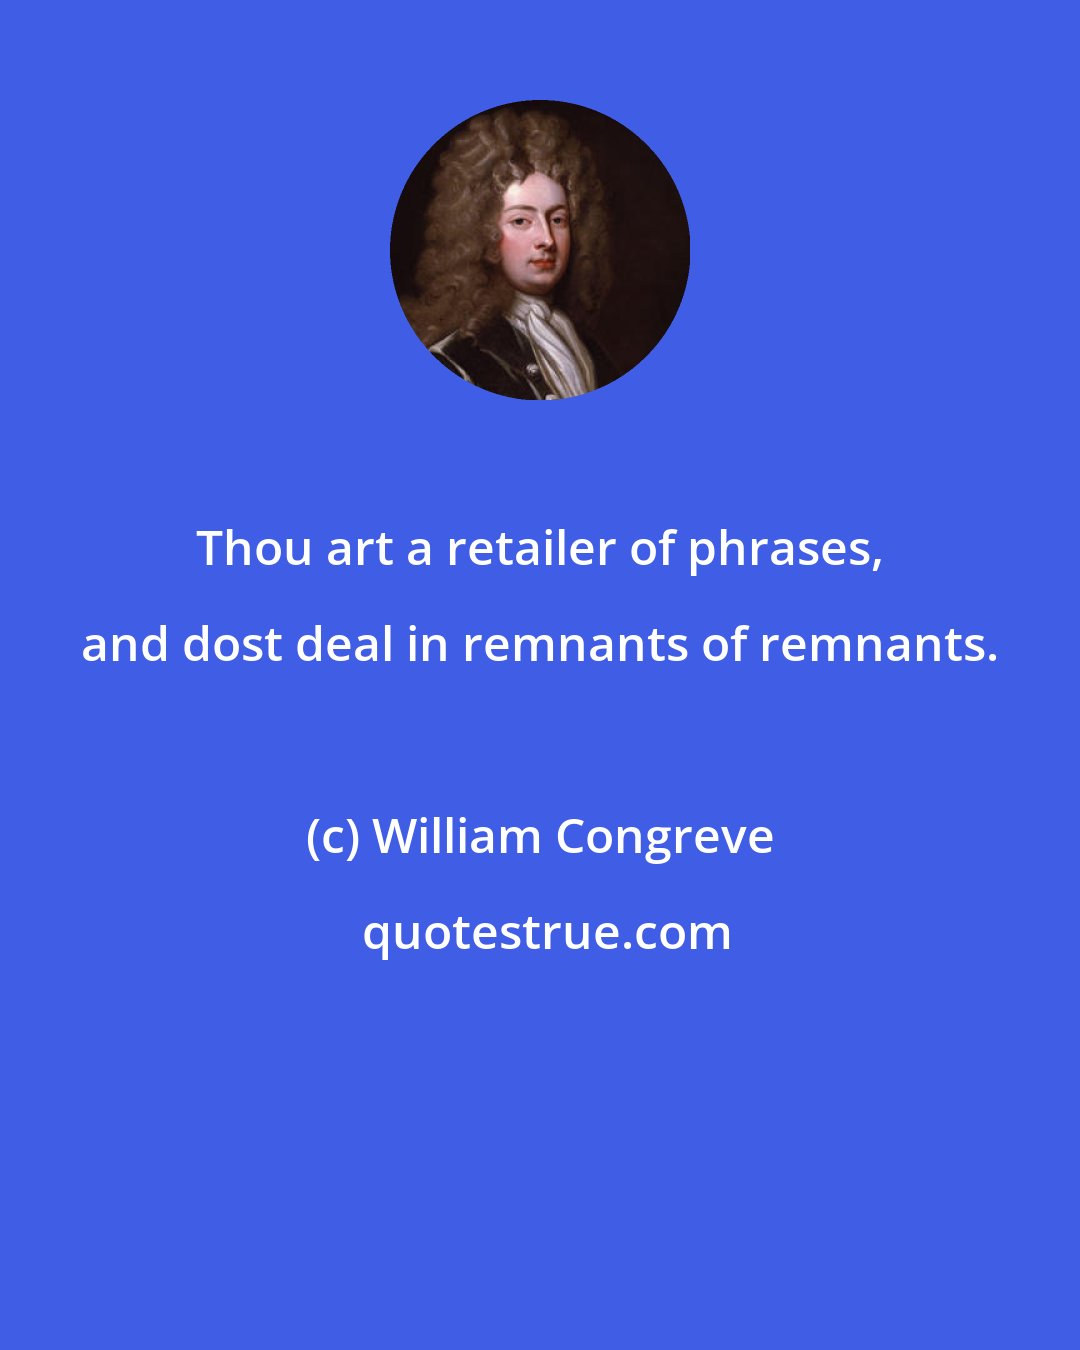 William Congreve: Thou art a retailer of phrases, and dost deal in remnants of remnants.